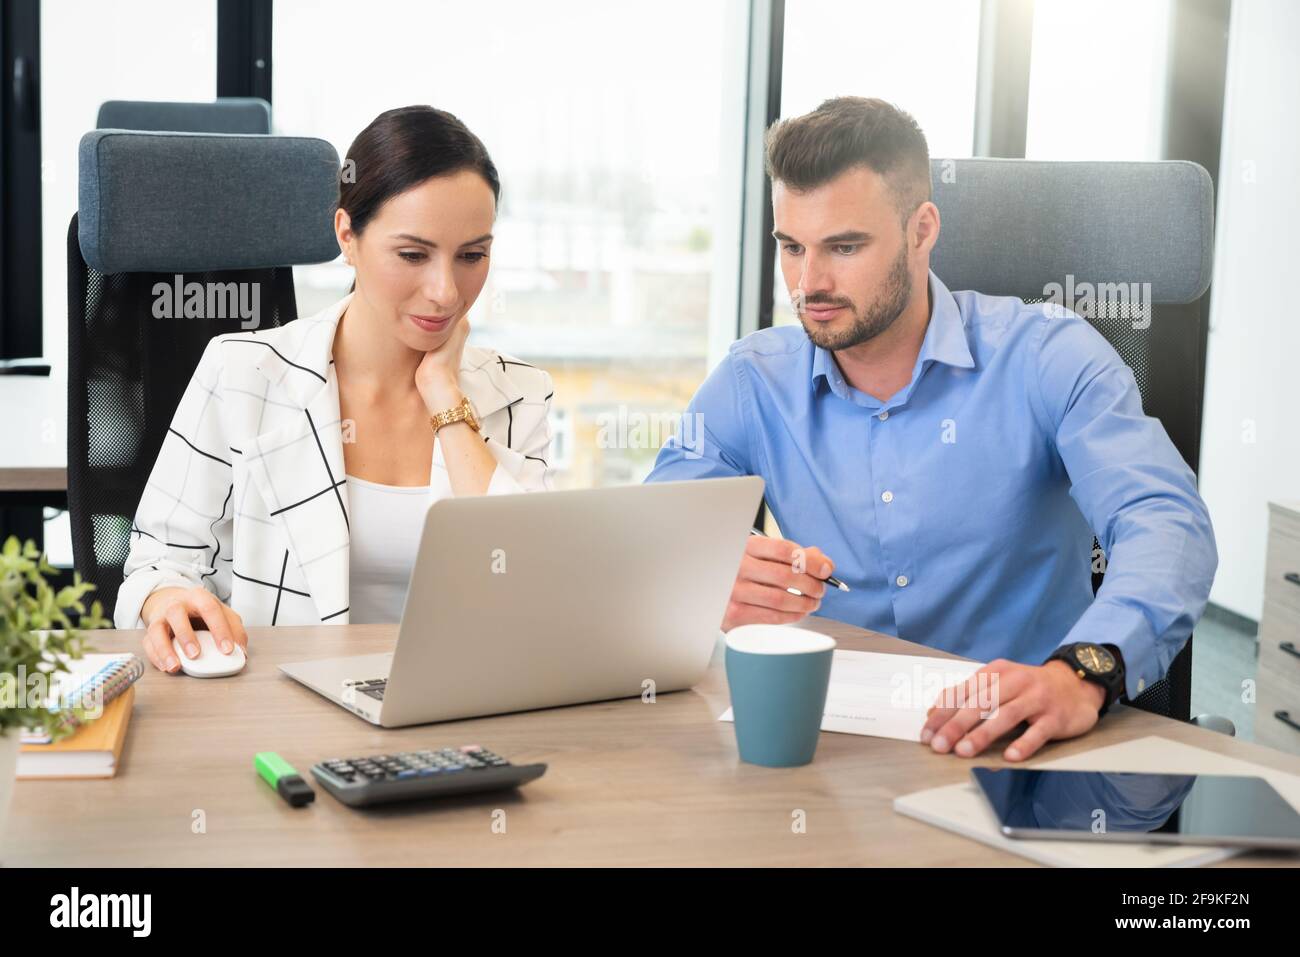 Business people working together. Business meeting in boardroom. Stock Photo